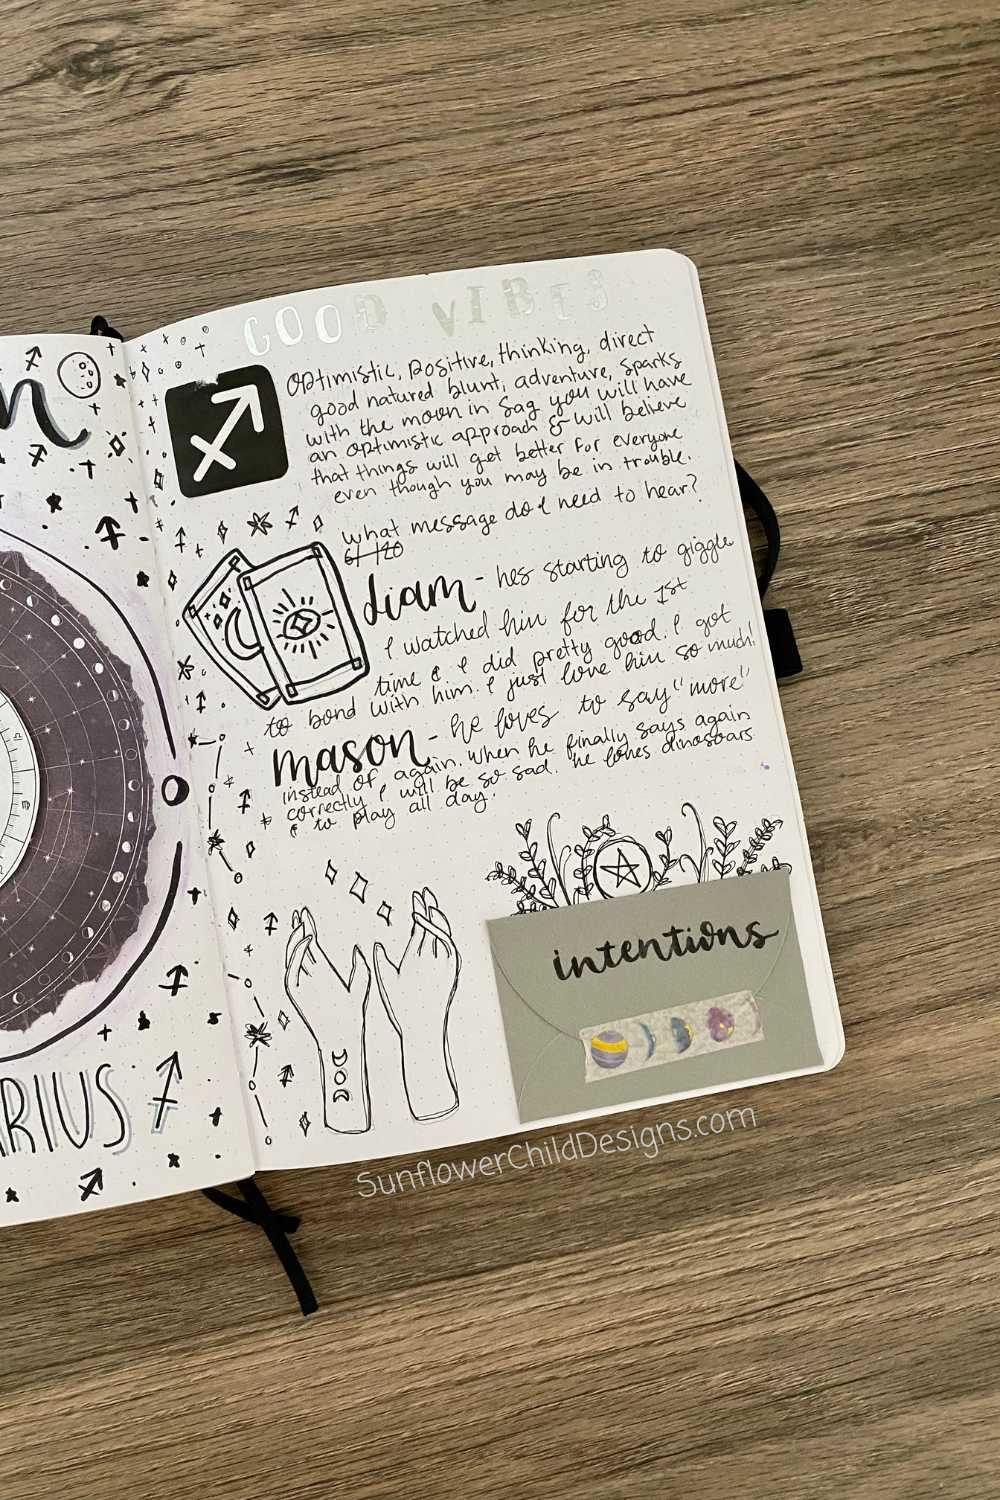 Witchy-Aesthetic-Bullet Journal-Pages-5.jpg